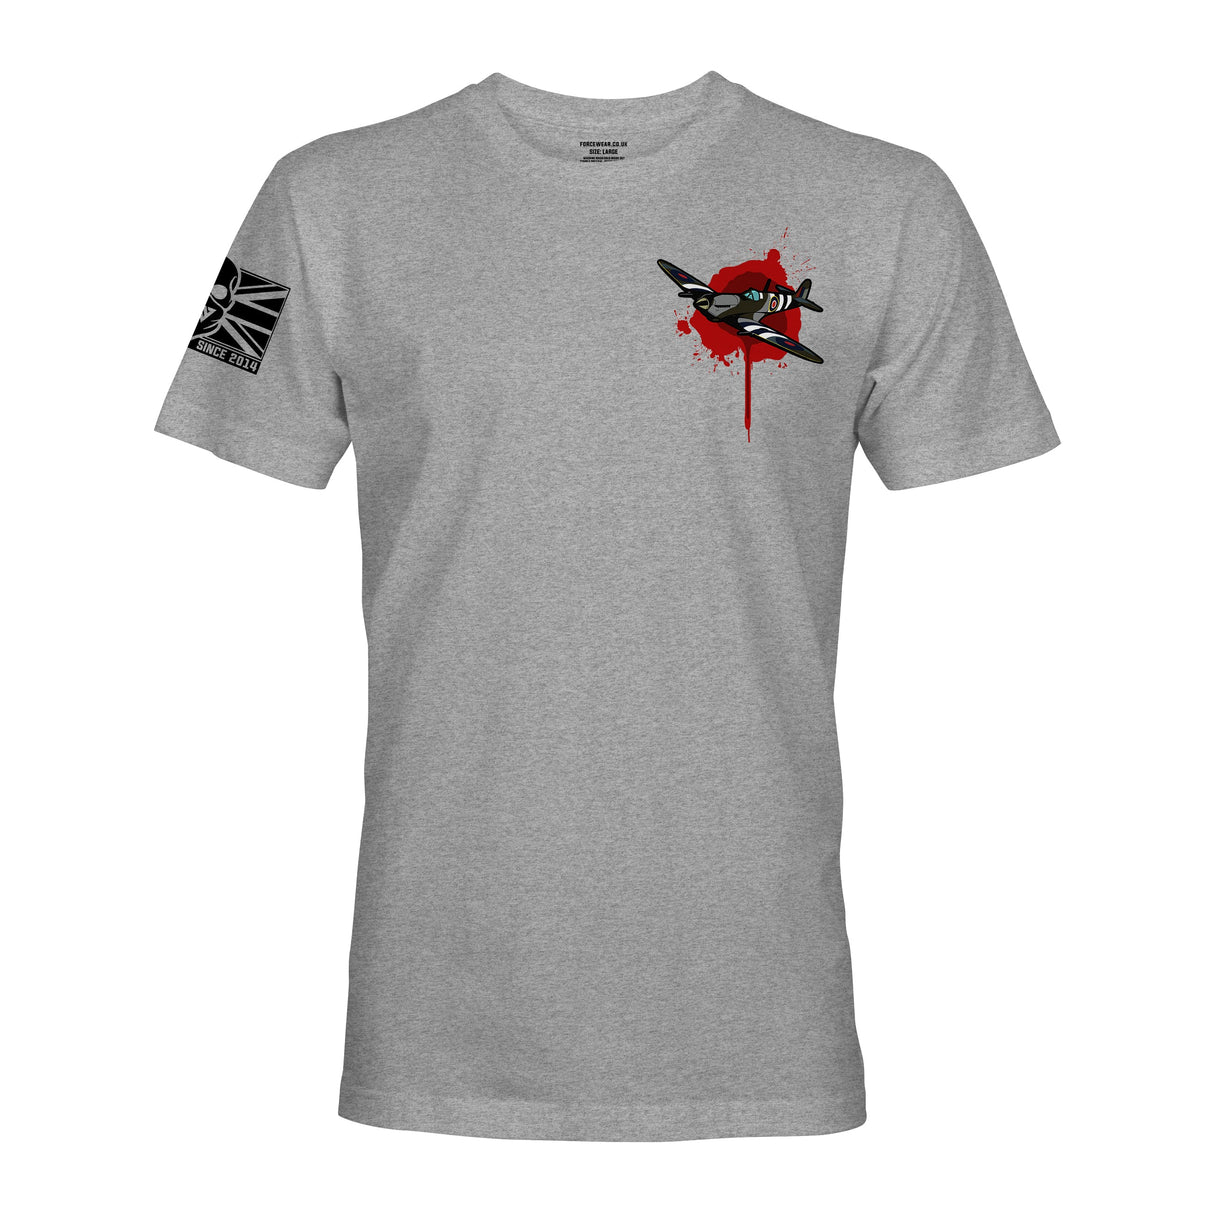 RAF SPITFIRE (WOUNDED) - Force Wear HQ - T-SHIRTS